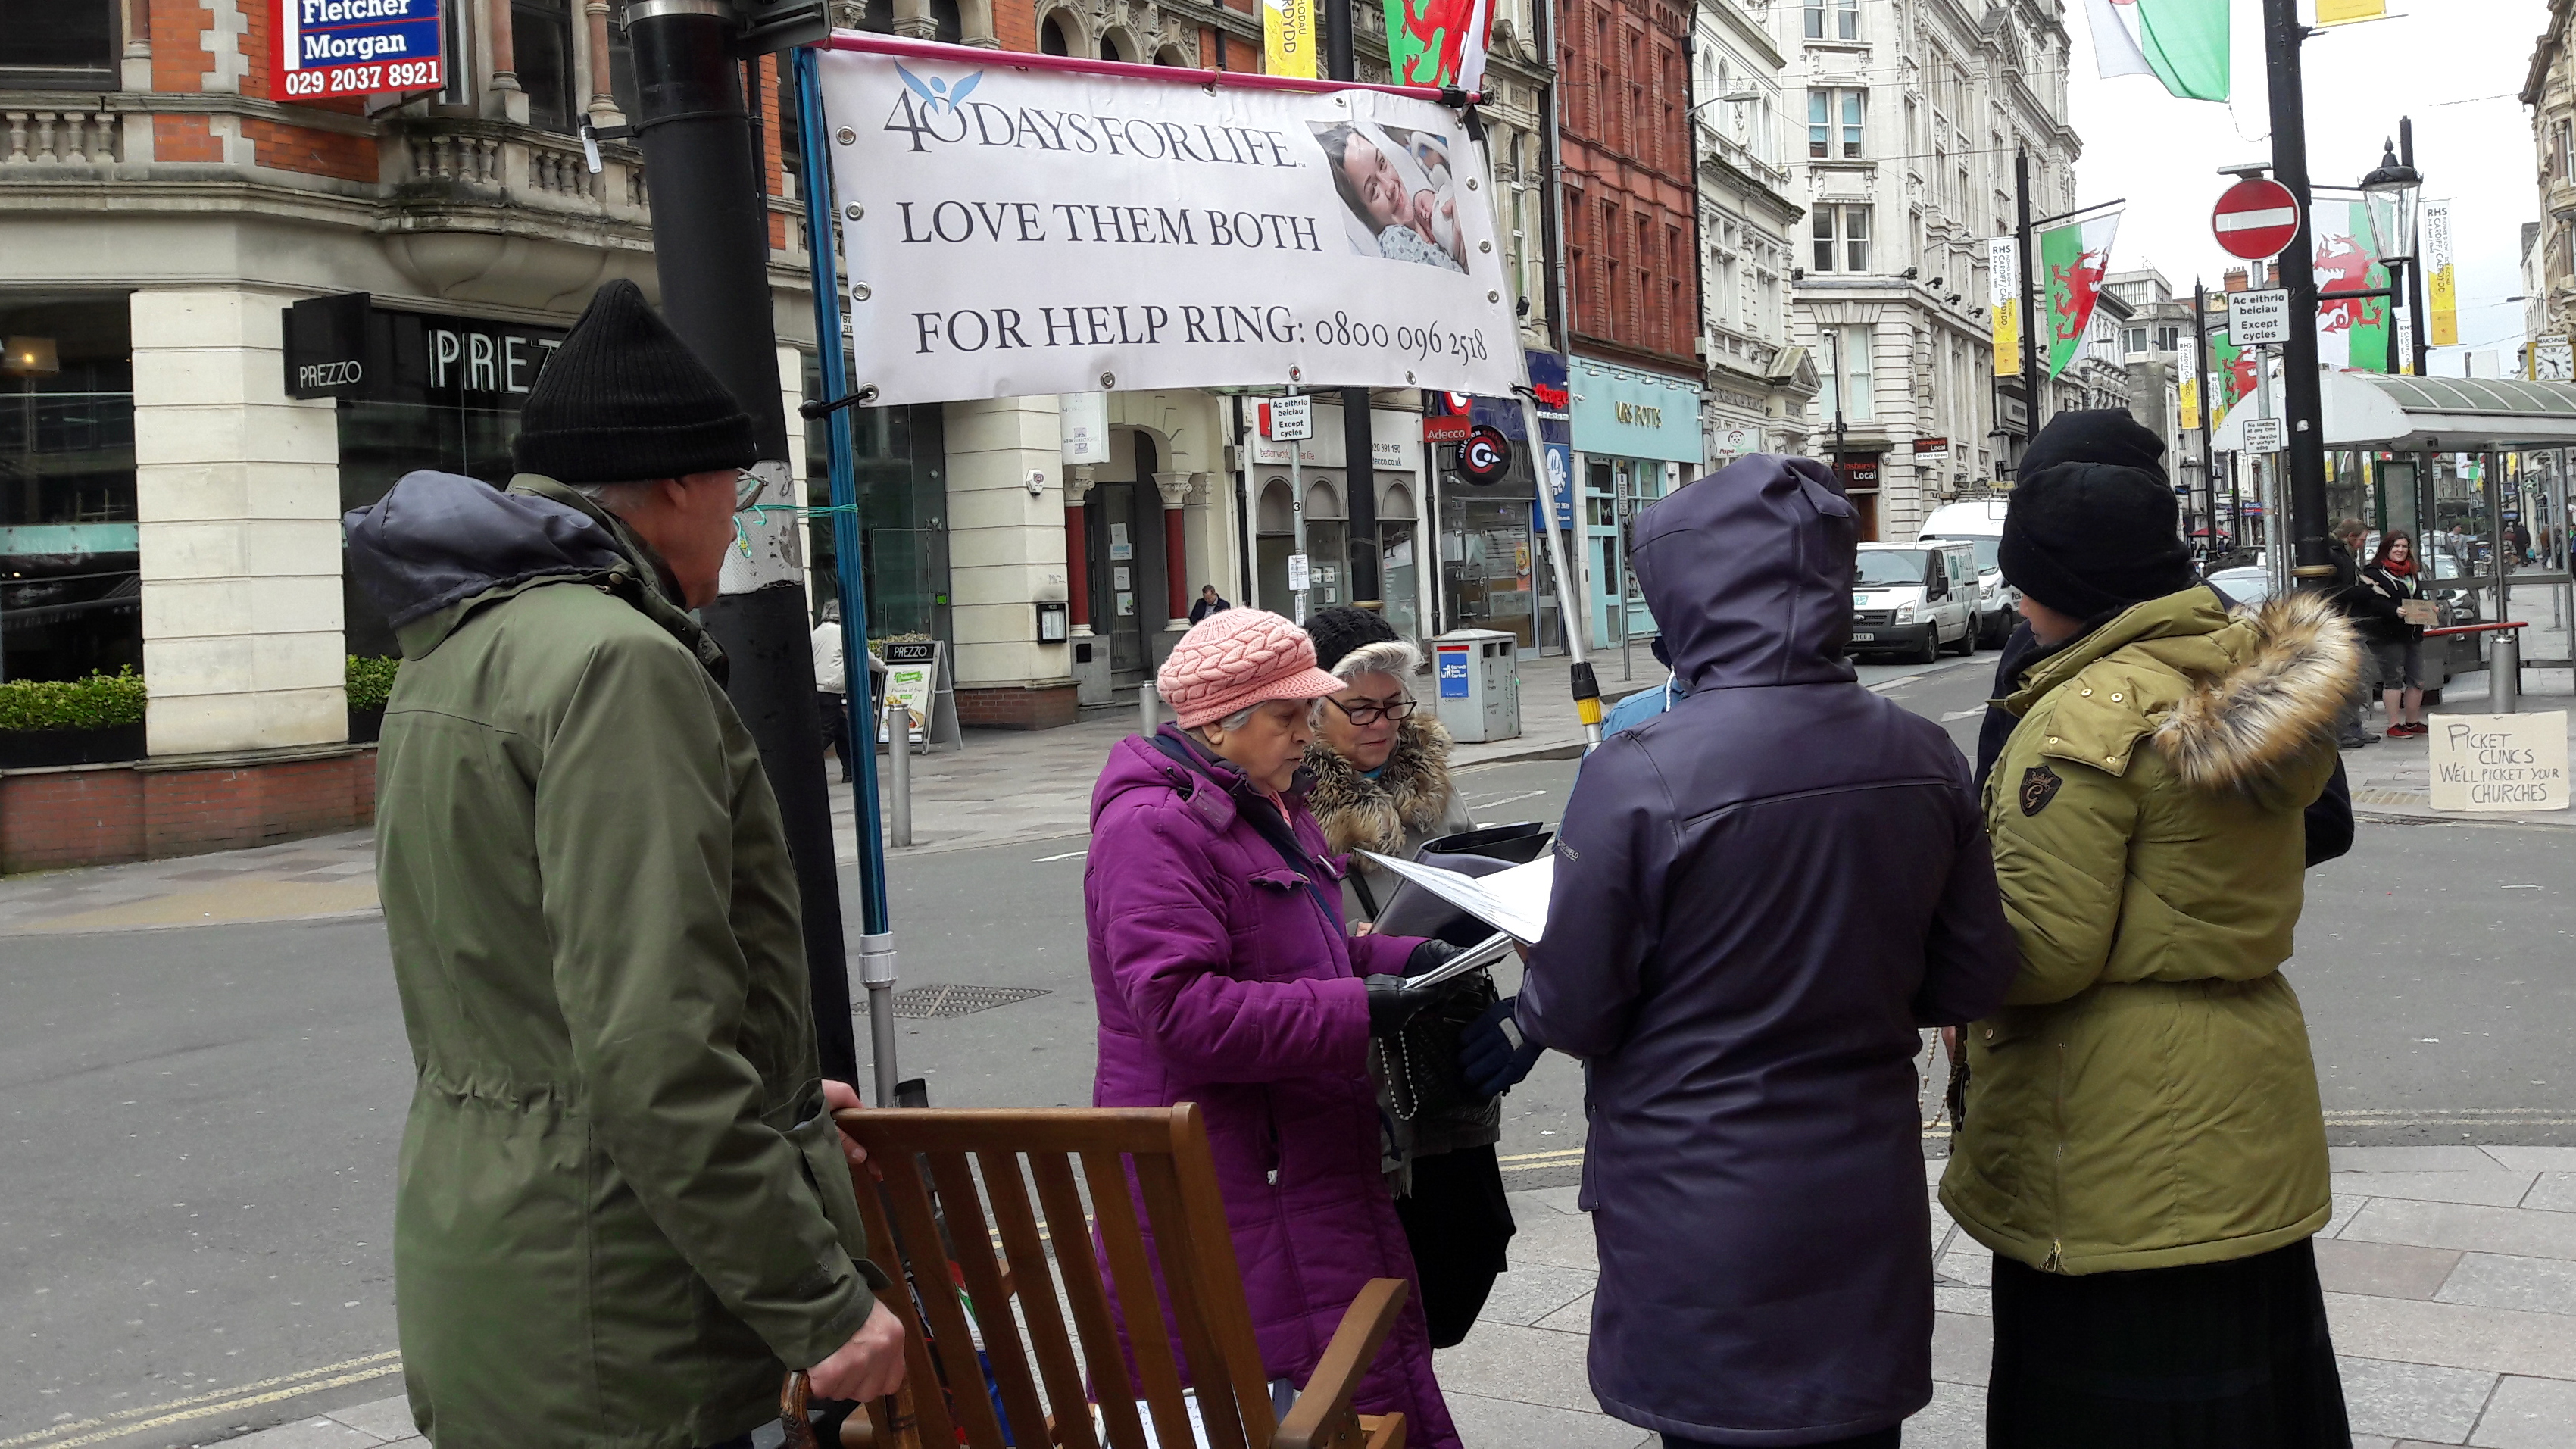 The 40 Days for Life vigil, which will be on St Mary Street until April 9.